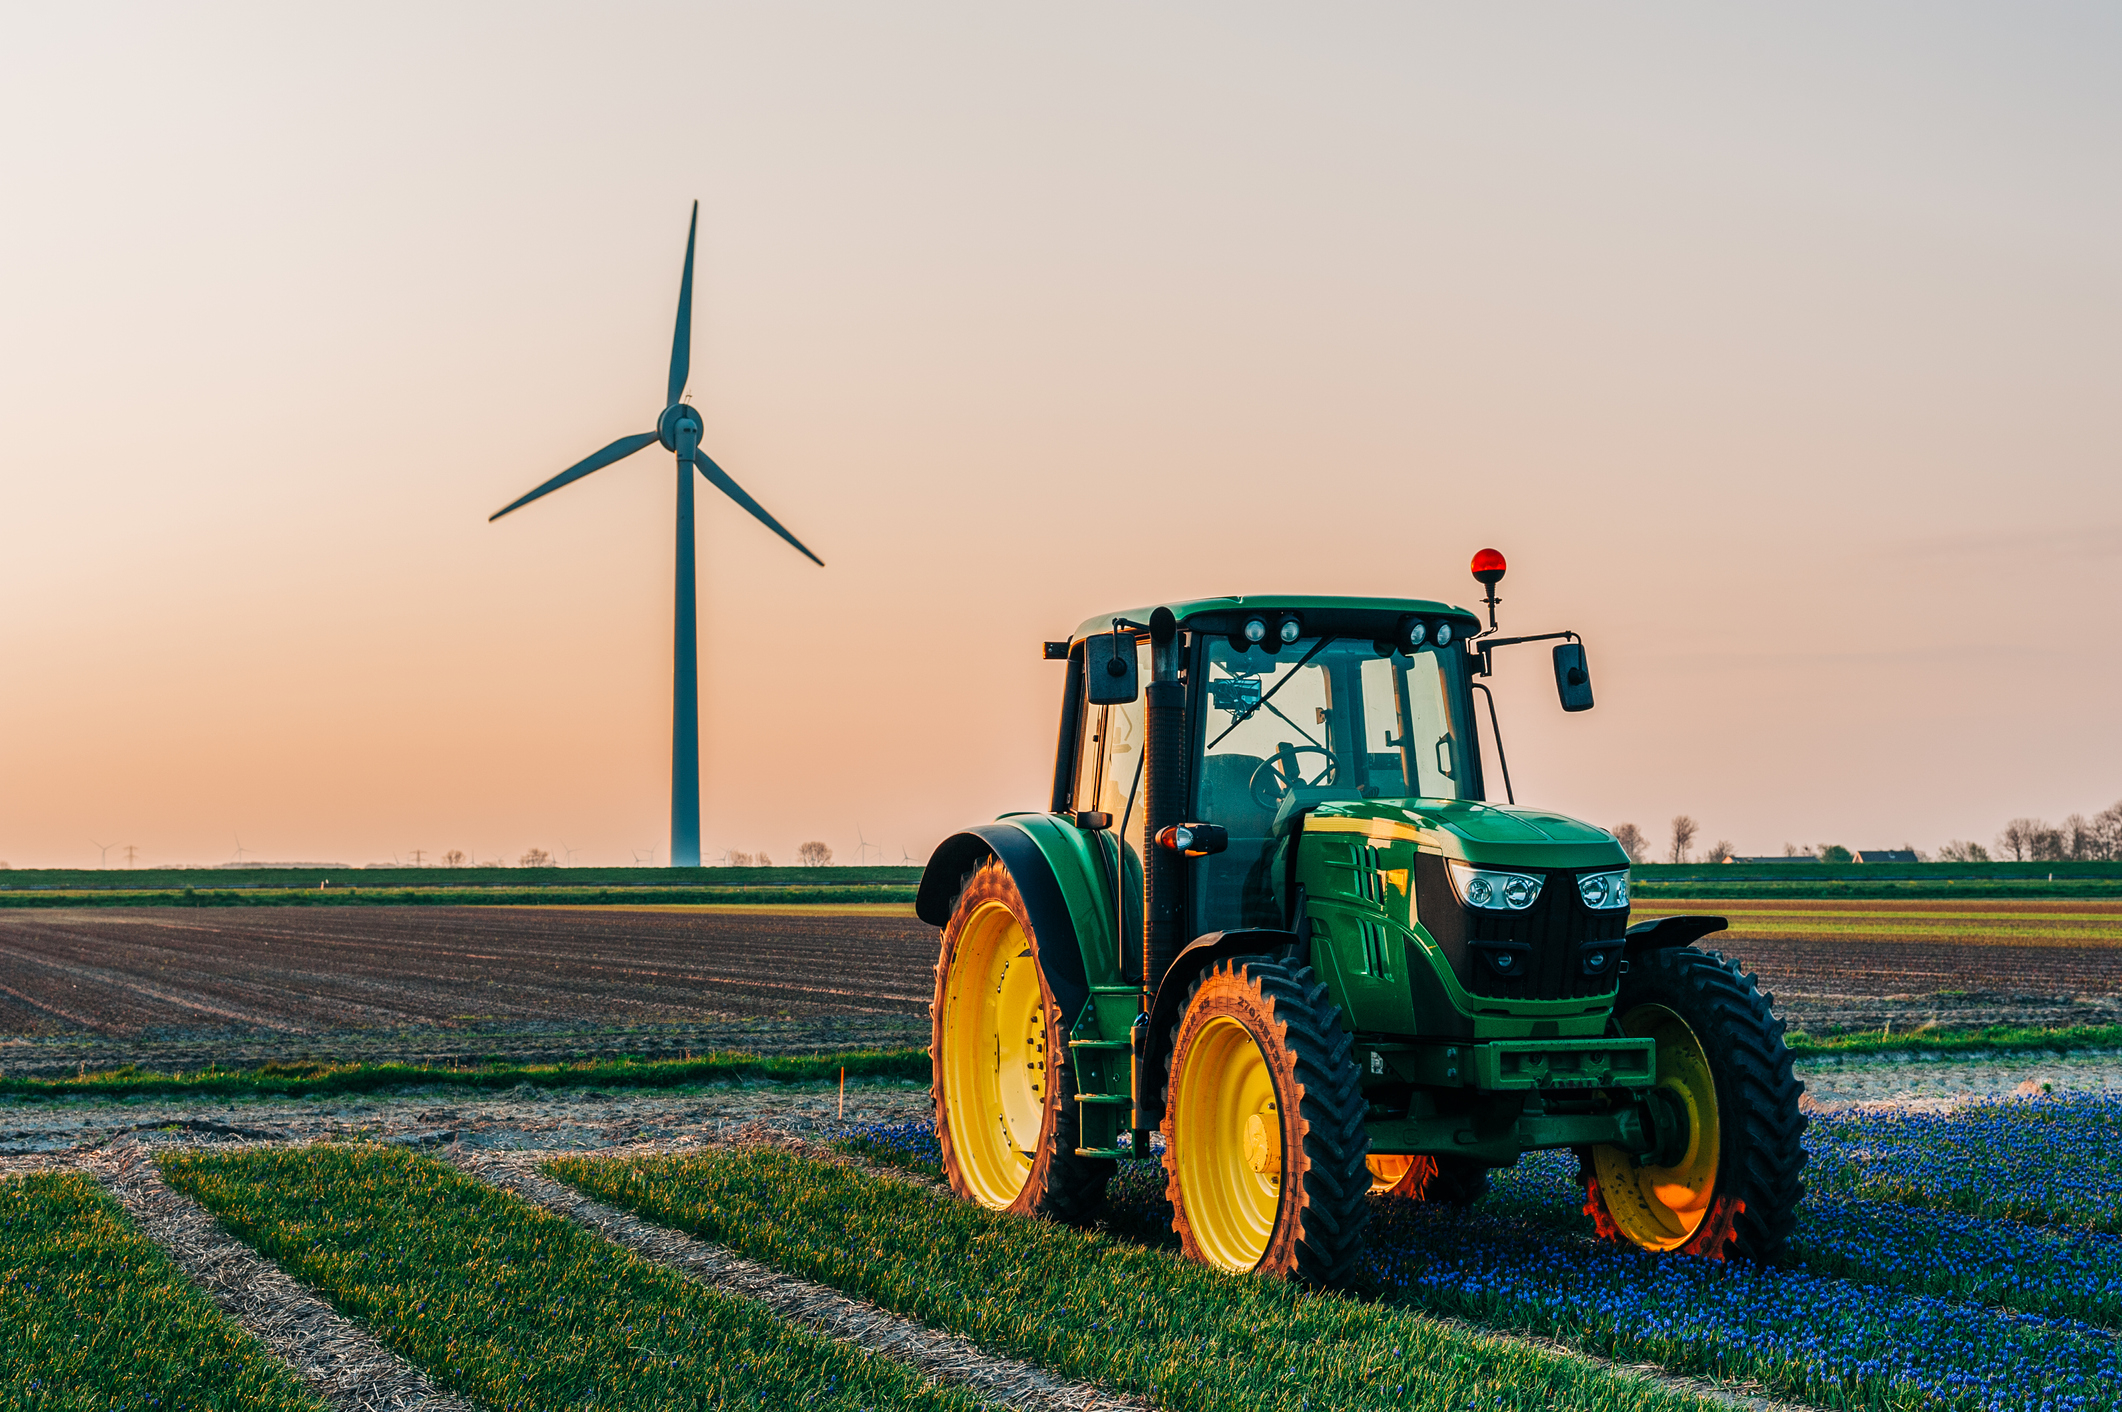 Tractor in a field with a wind turbine in the background